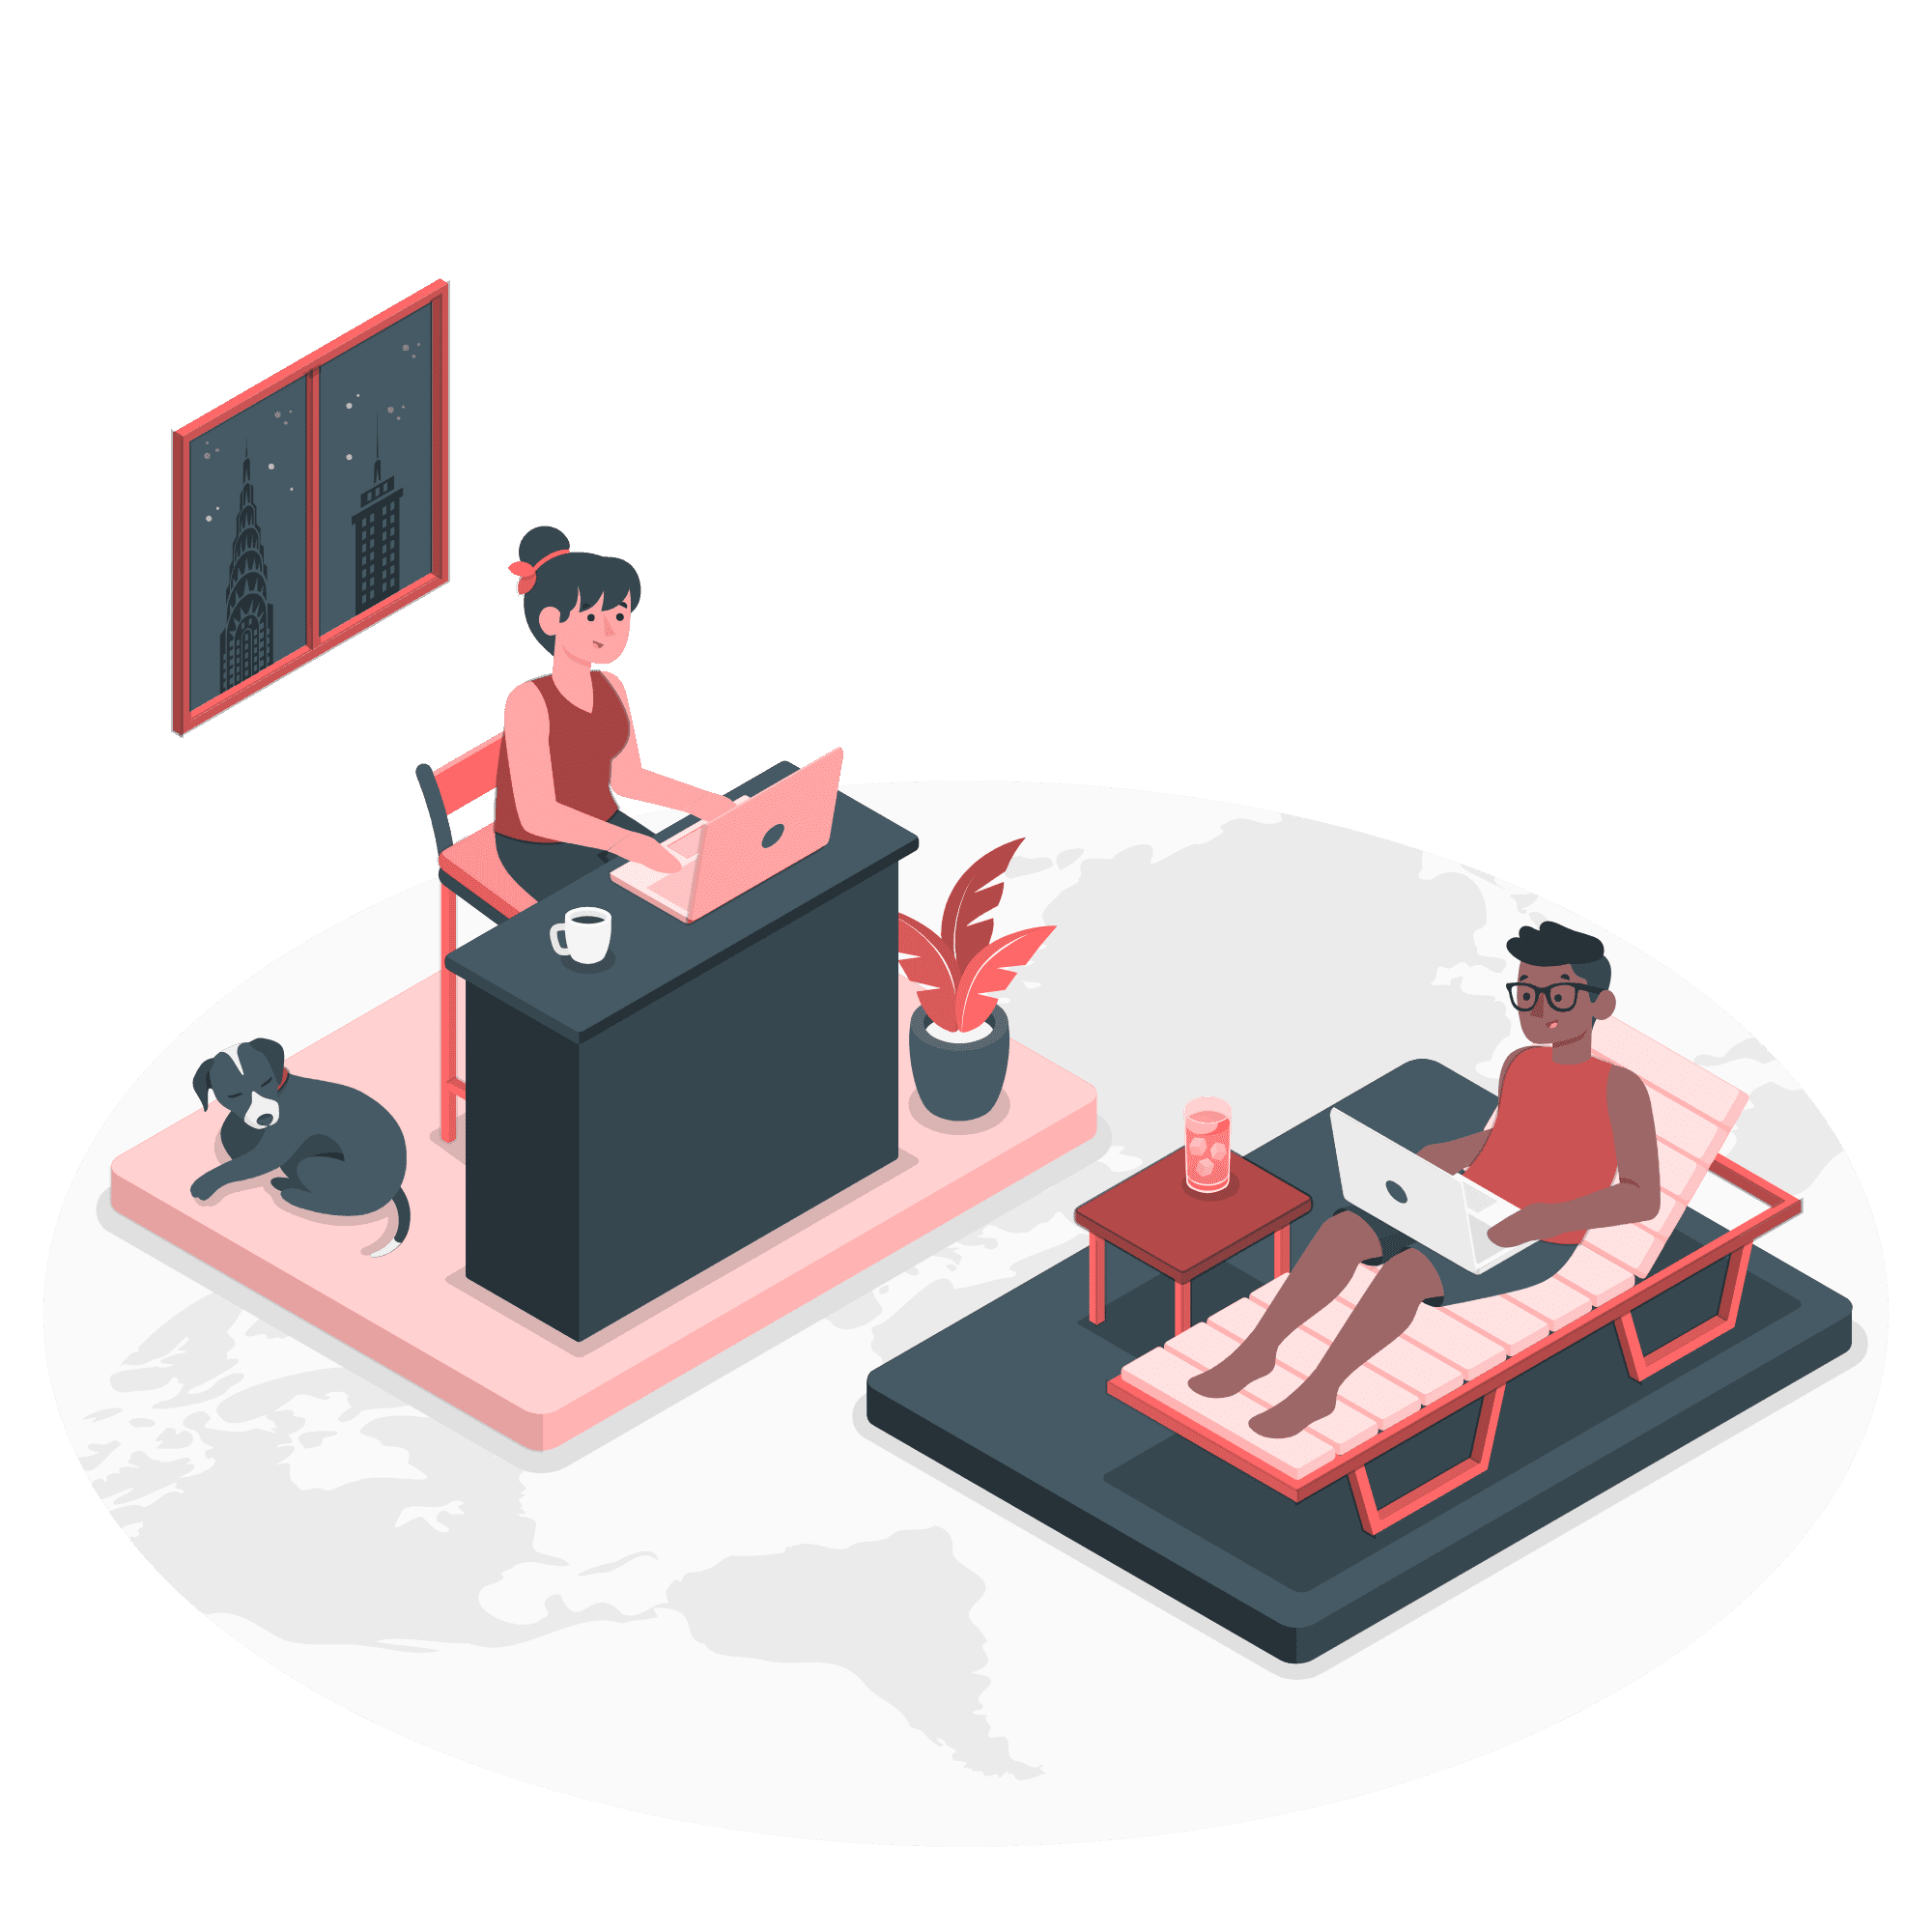 developers working remotely in different parts of the world illustration